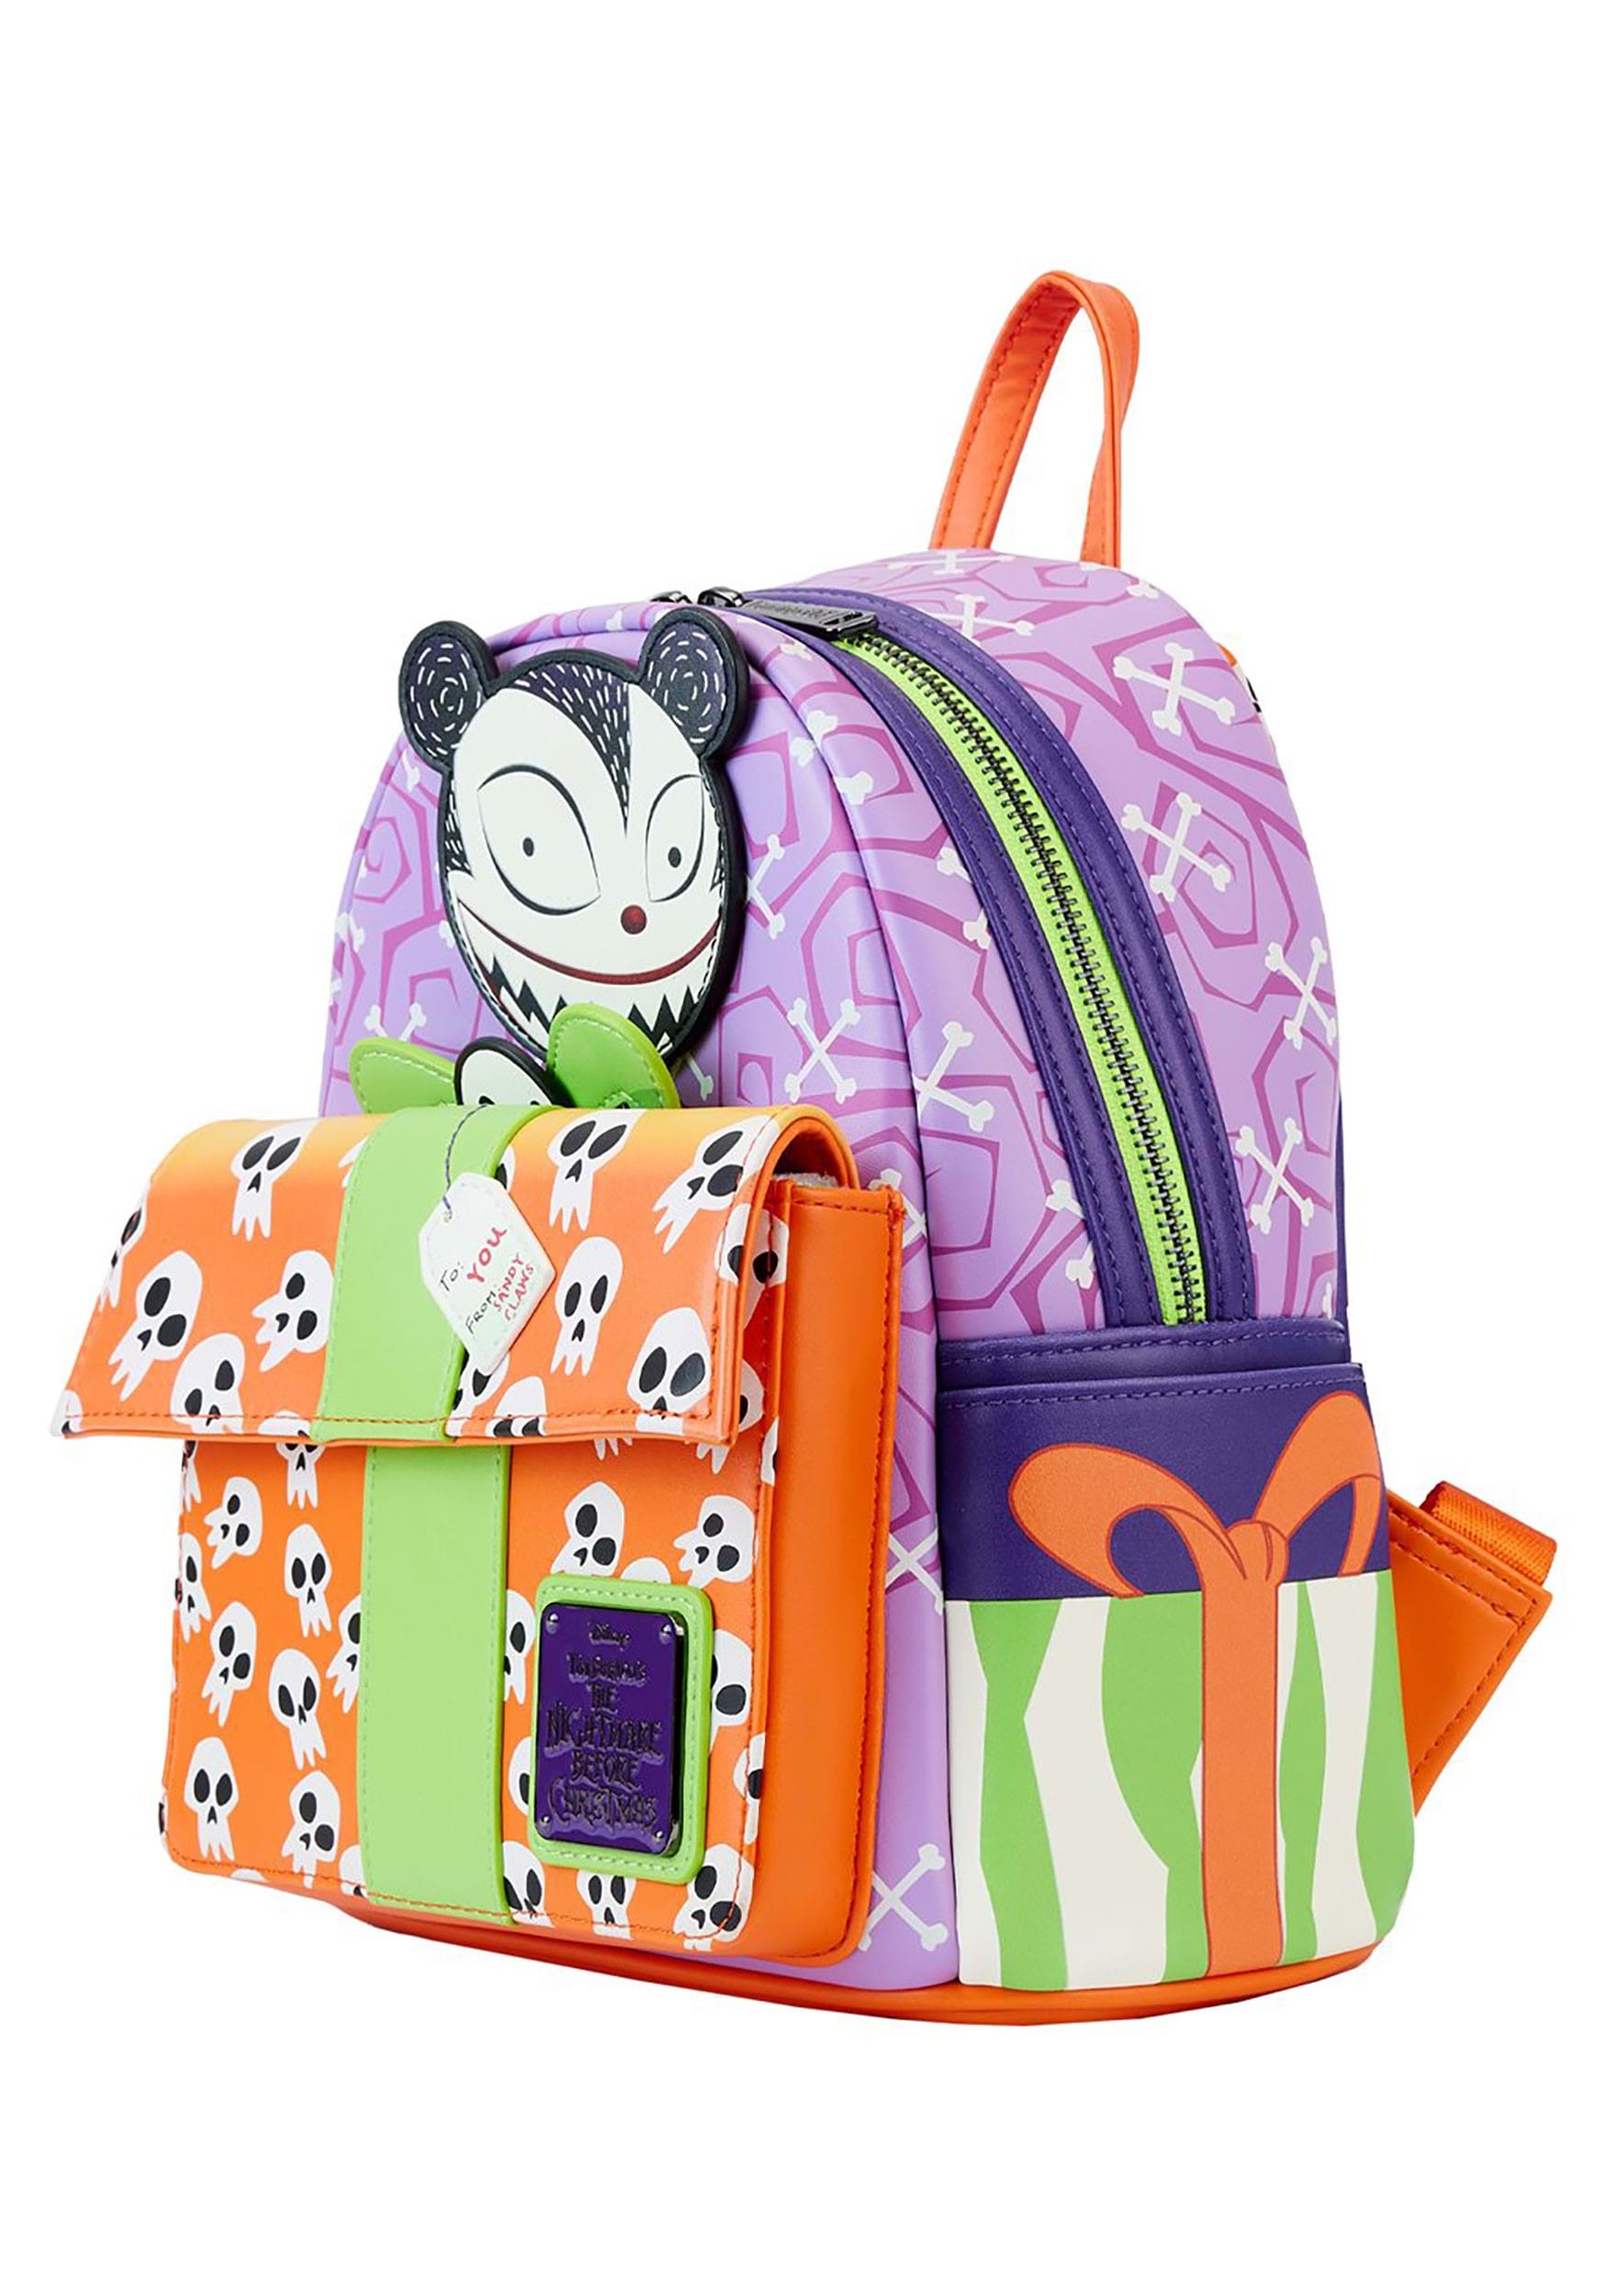 Disney Nightmare Before Christmas Scary Teddy Present Glow Loungefly Mini Backpack